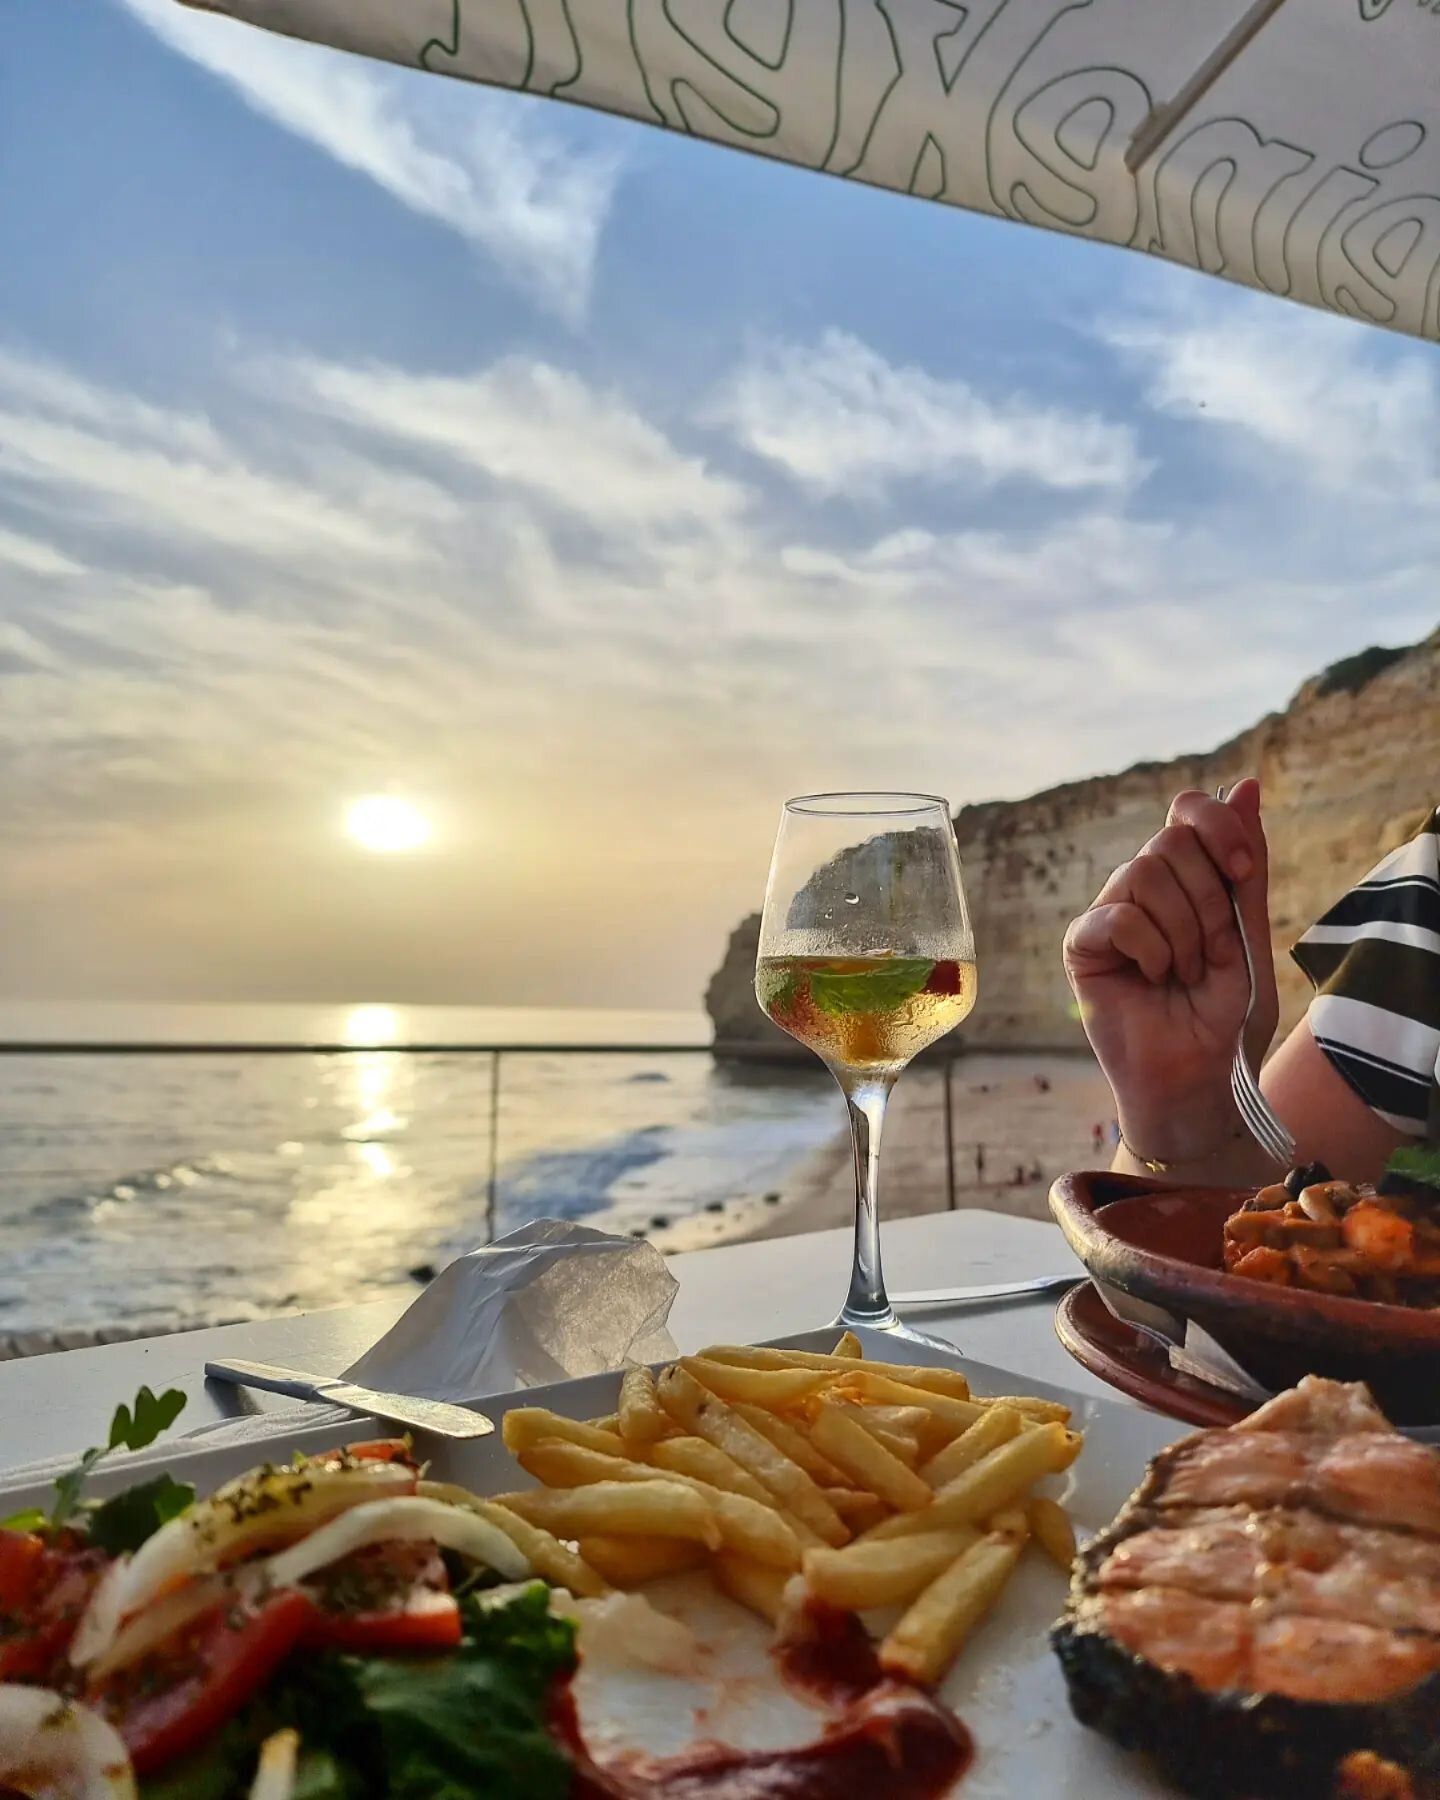 Dinner on the beach in October? No problem here... Perfect start of a perfect evening in the Algarve. Fresh delicious fish with white #sangria looking at the sunset.

#algarve #algarvelovers #visitalgarve #algarvetourism #carvoeiro #portugal #visitpo